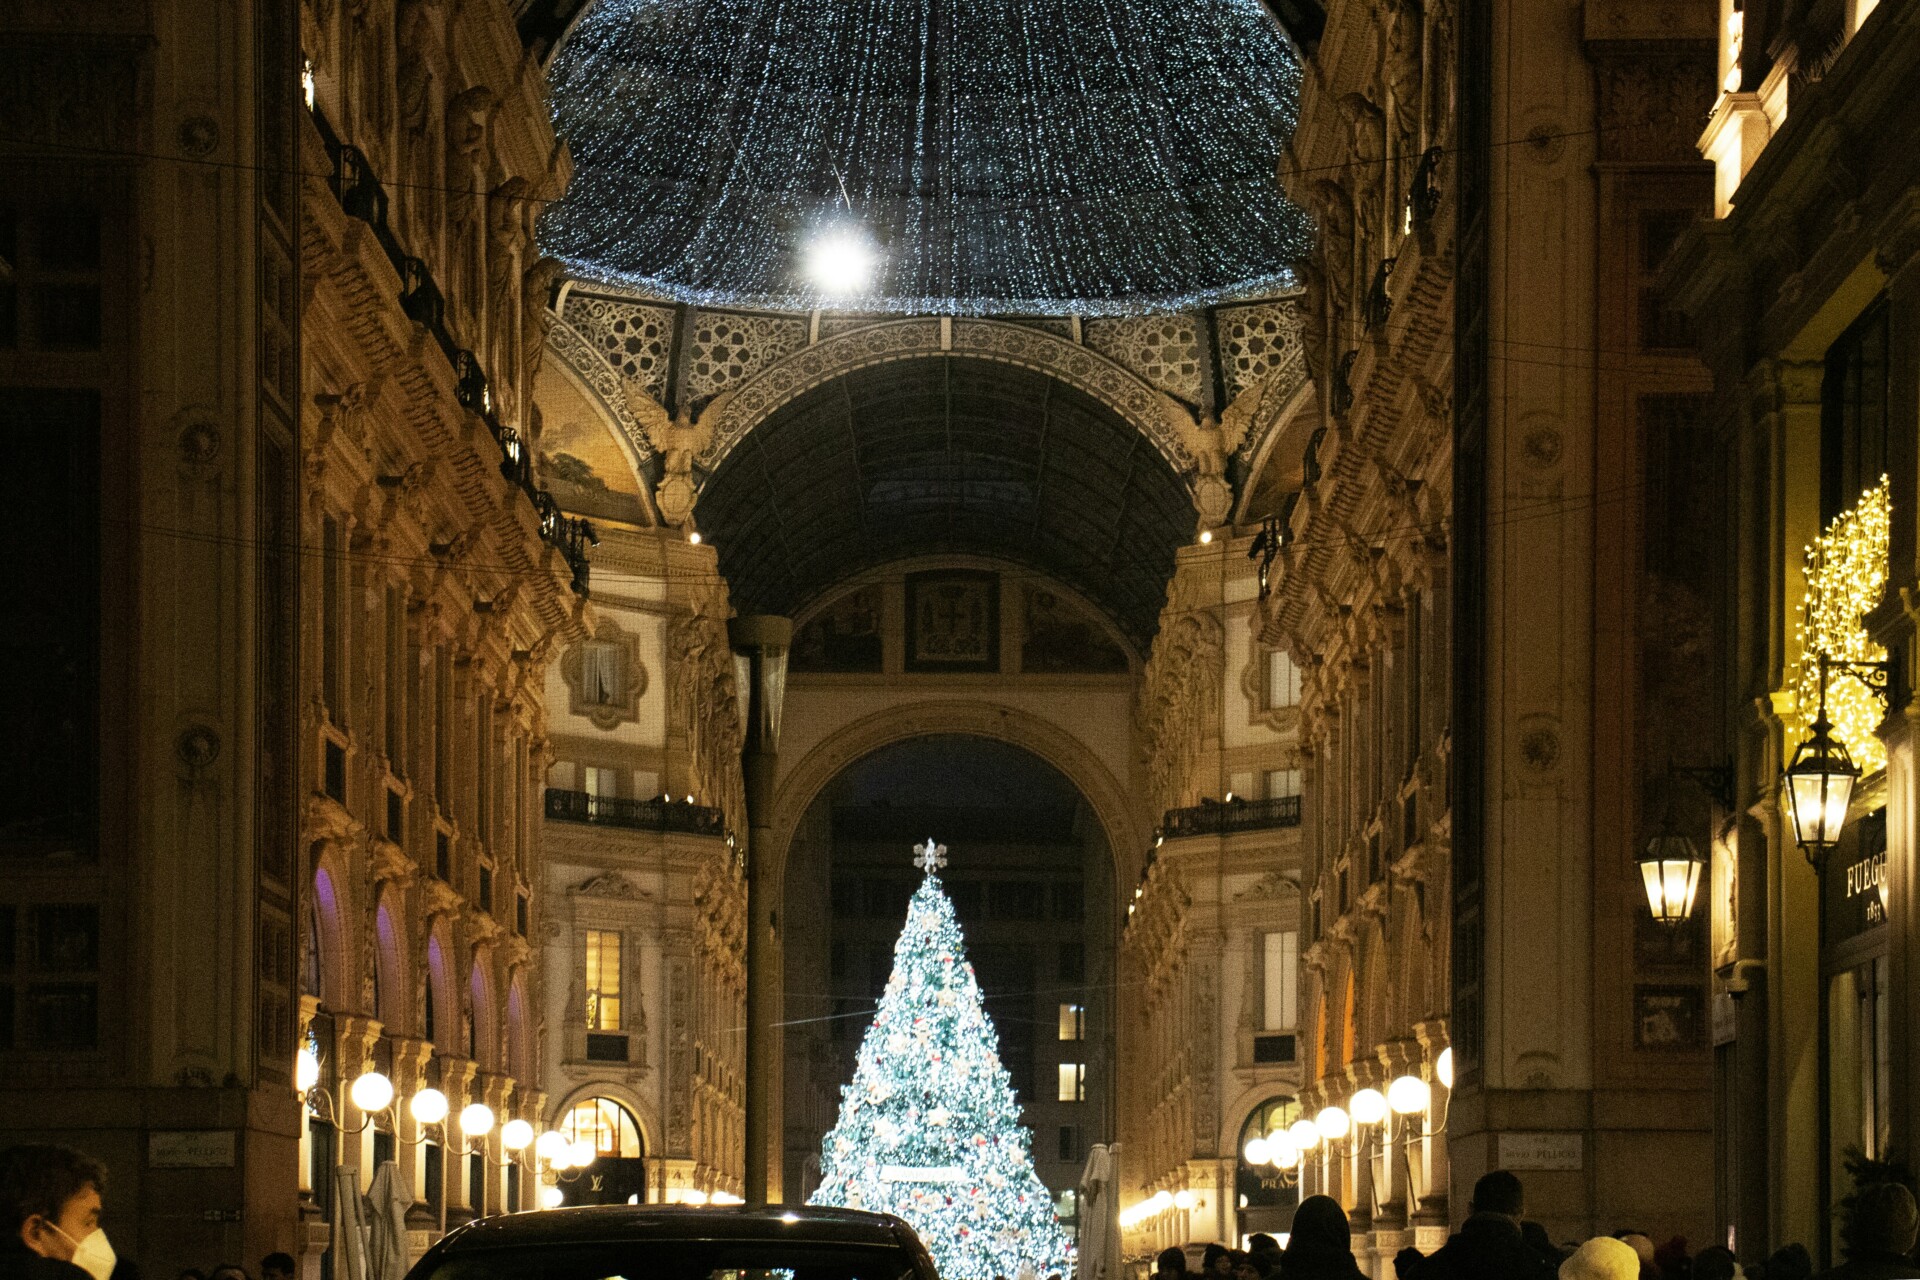 A Christmas tree in Milan, Italy